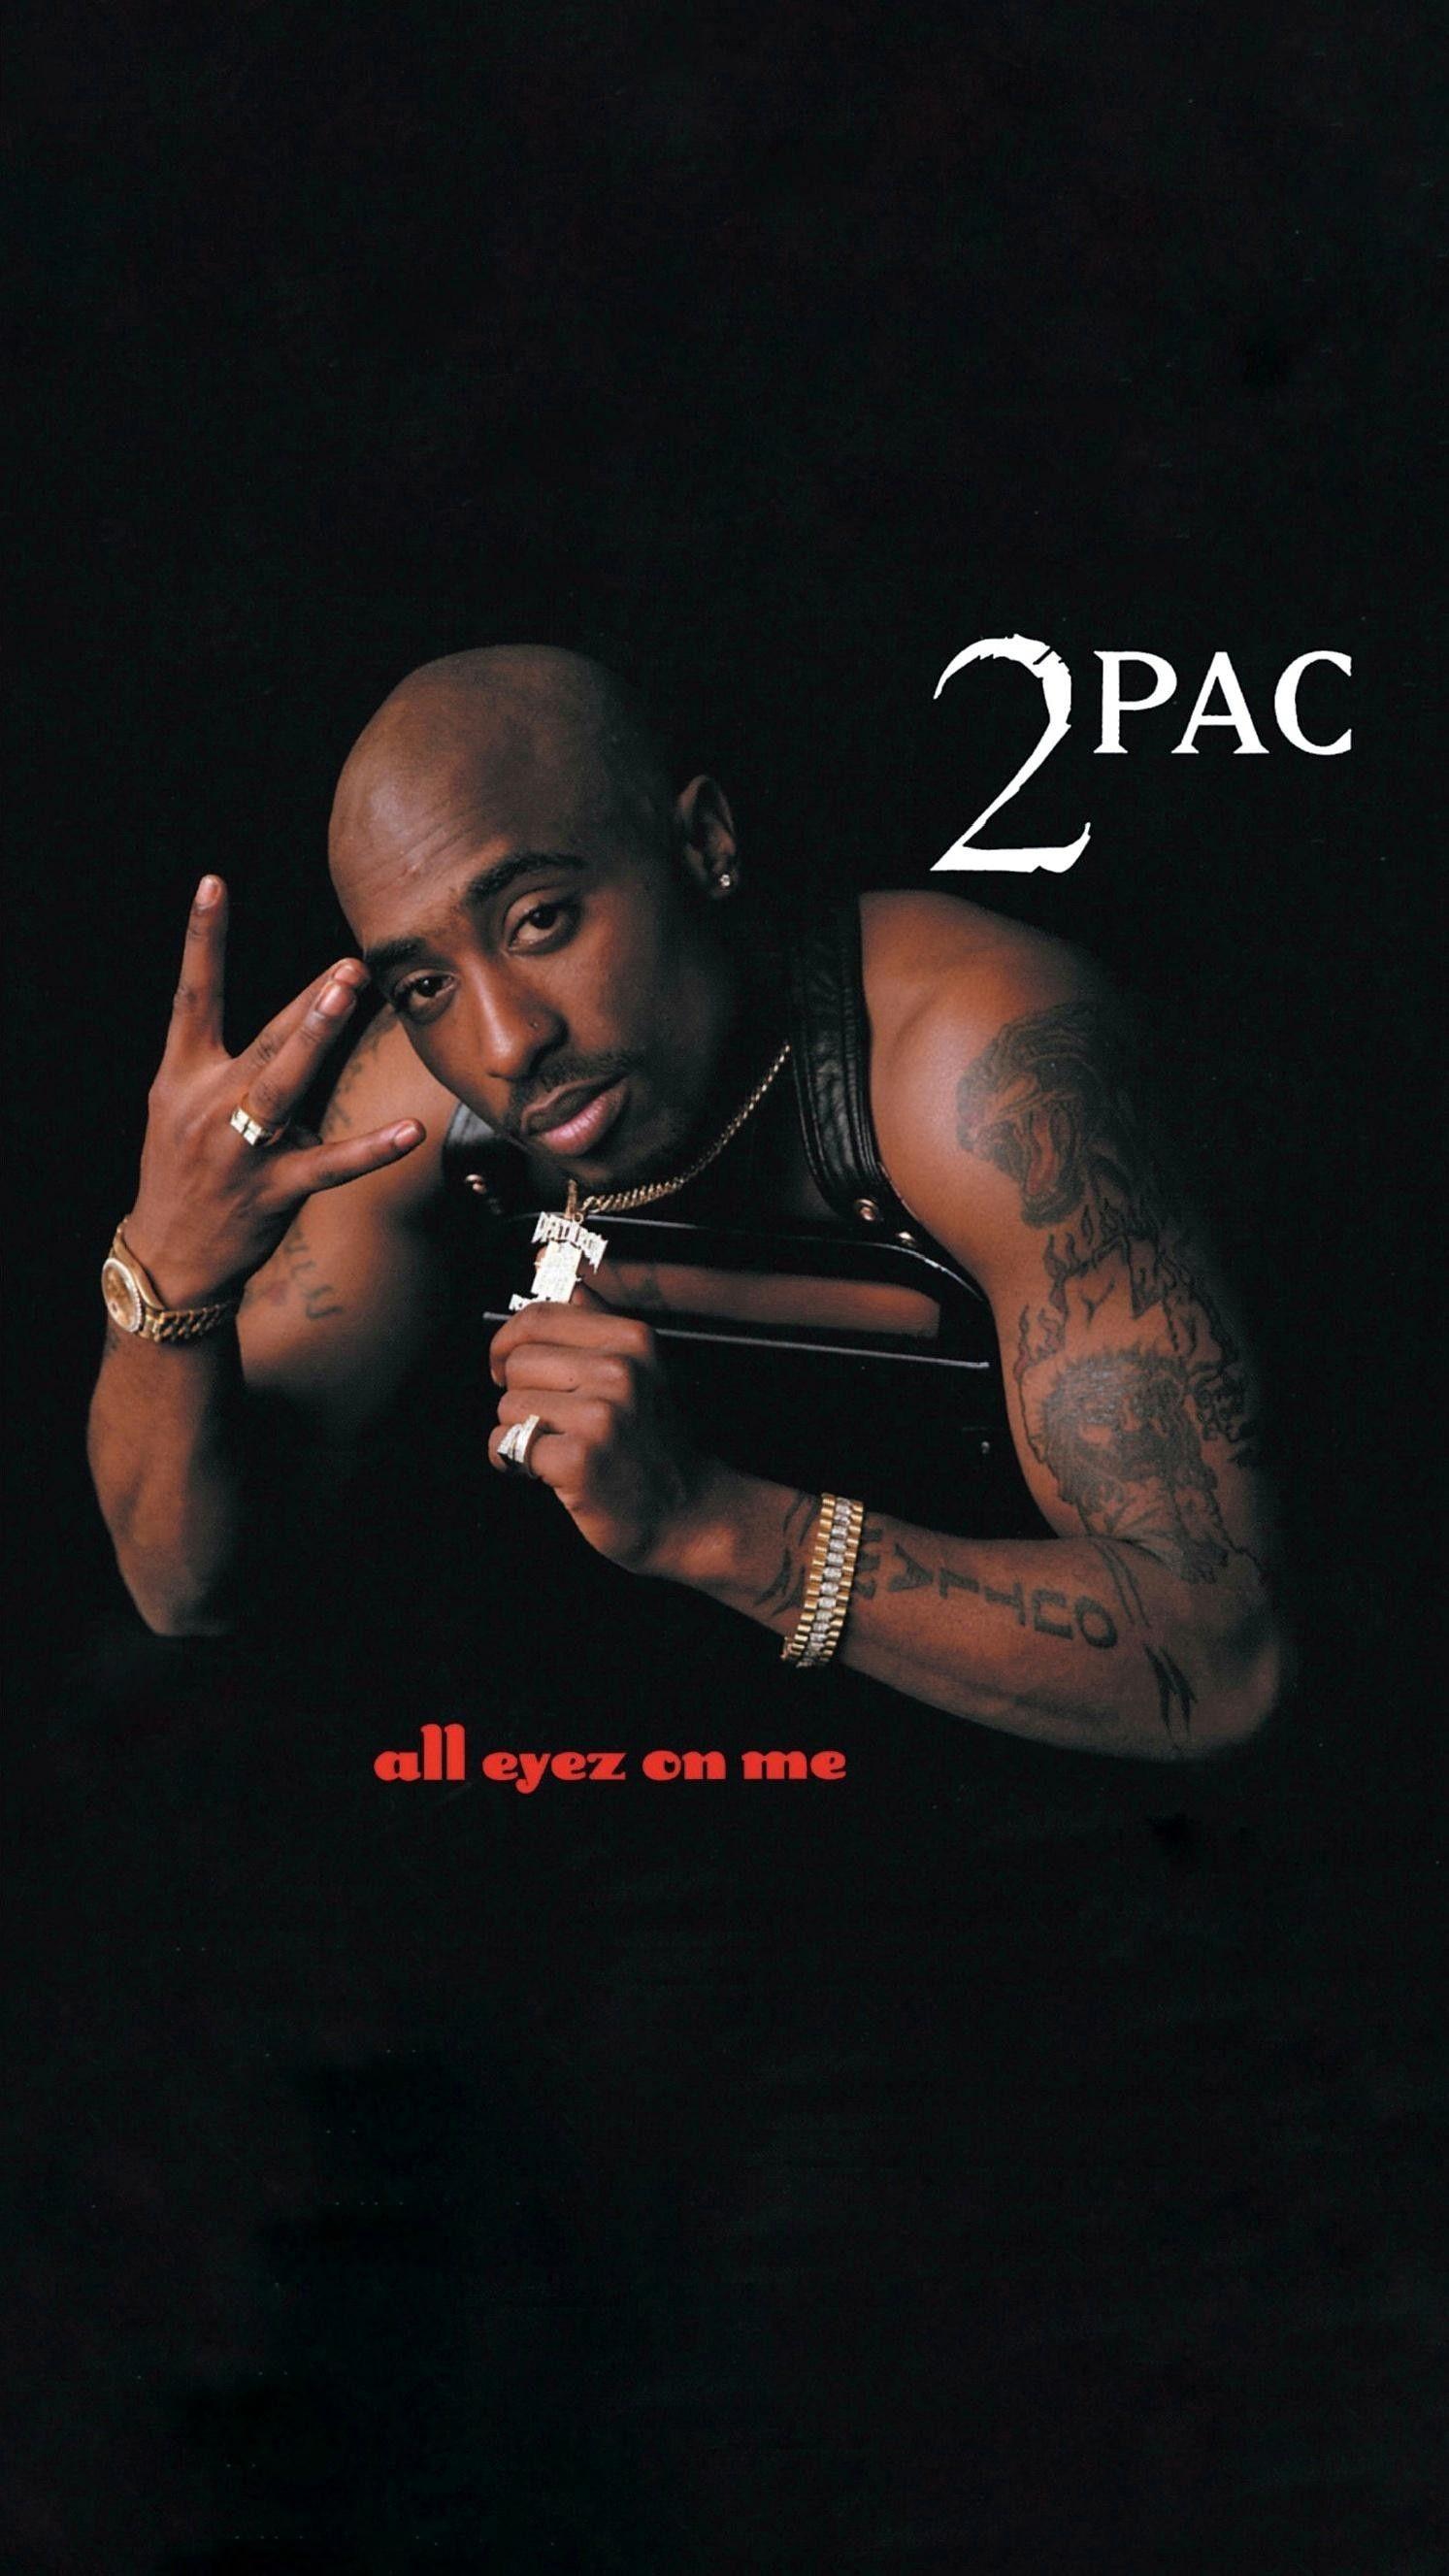 2pac only god can judge me wallpaper